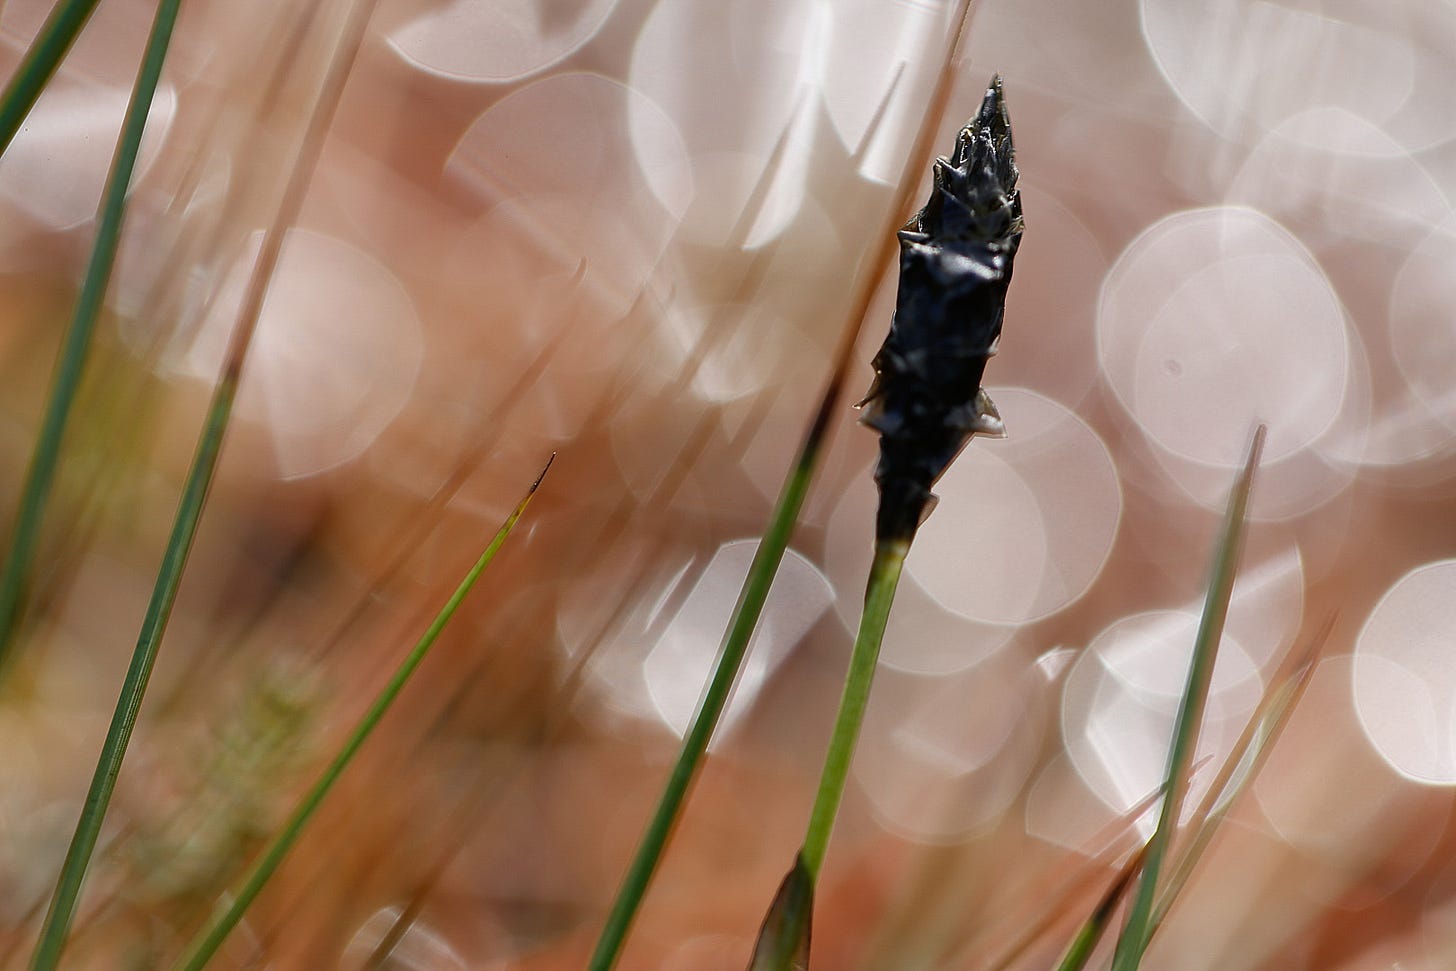 The black flower bud of Hare’s tail cotton grass (Eriophorum vaginatum) backlit by reflected light kn the surface of the moss (lowland raised bog)